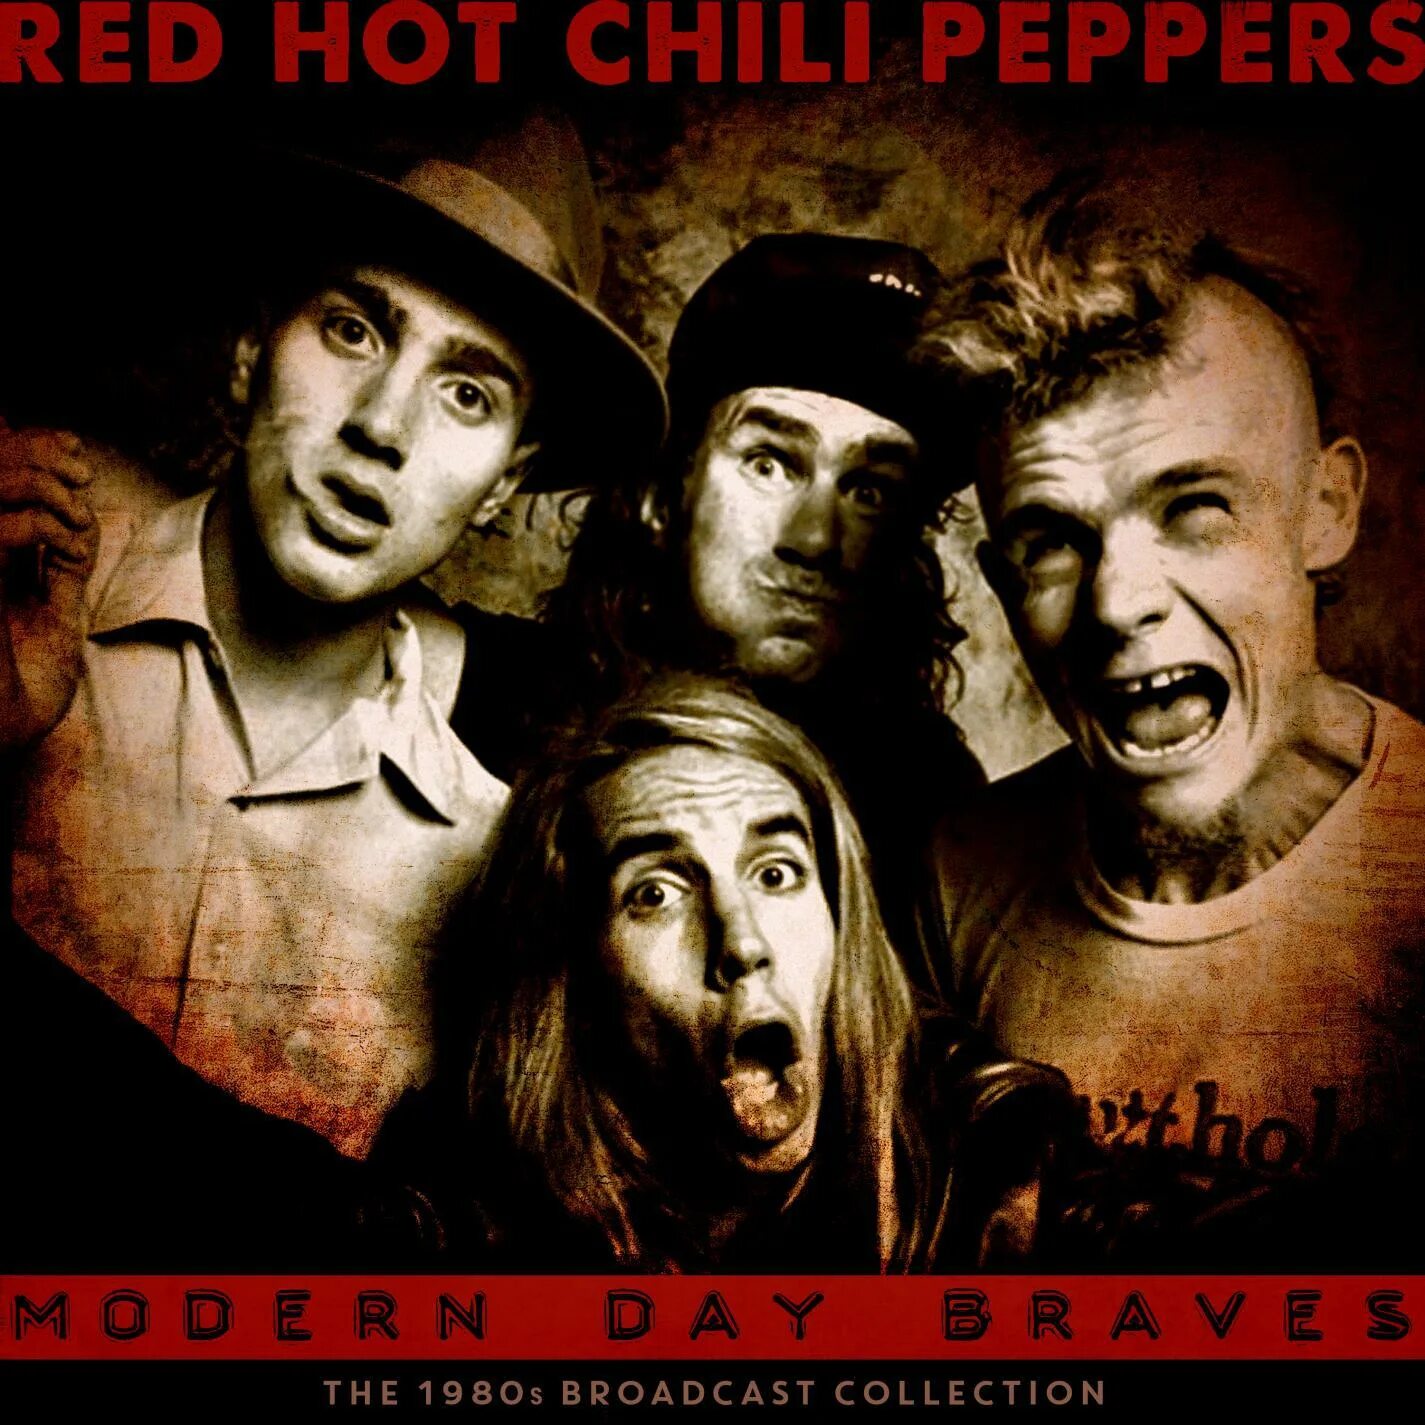 Red hot peppers википедия. RHCP 1988. RHCP 1989. Red hot Chili Peppers. Ред хот Чили Пепперс.